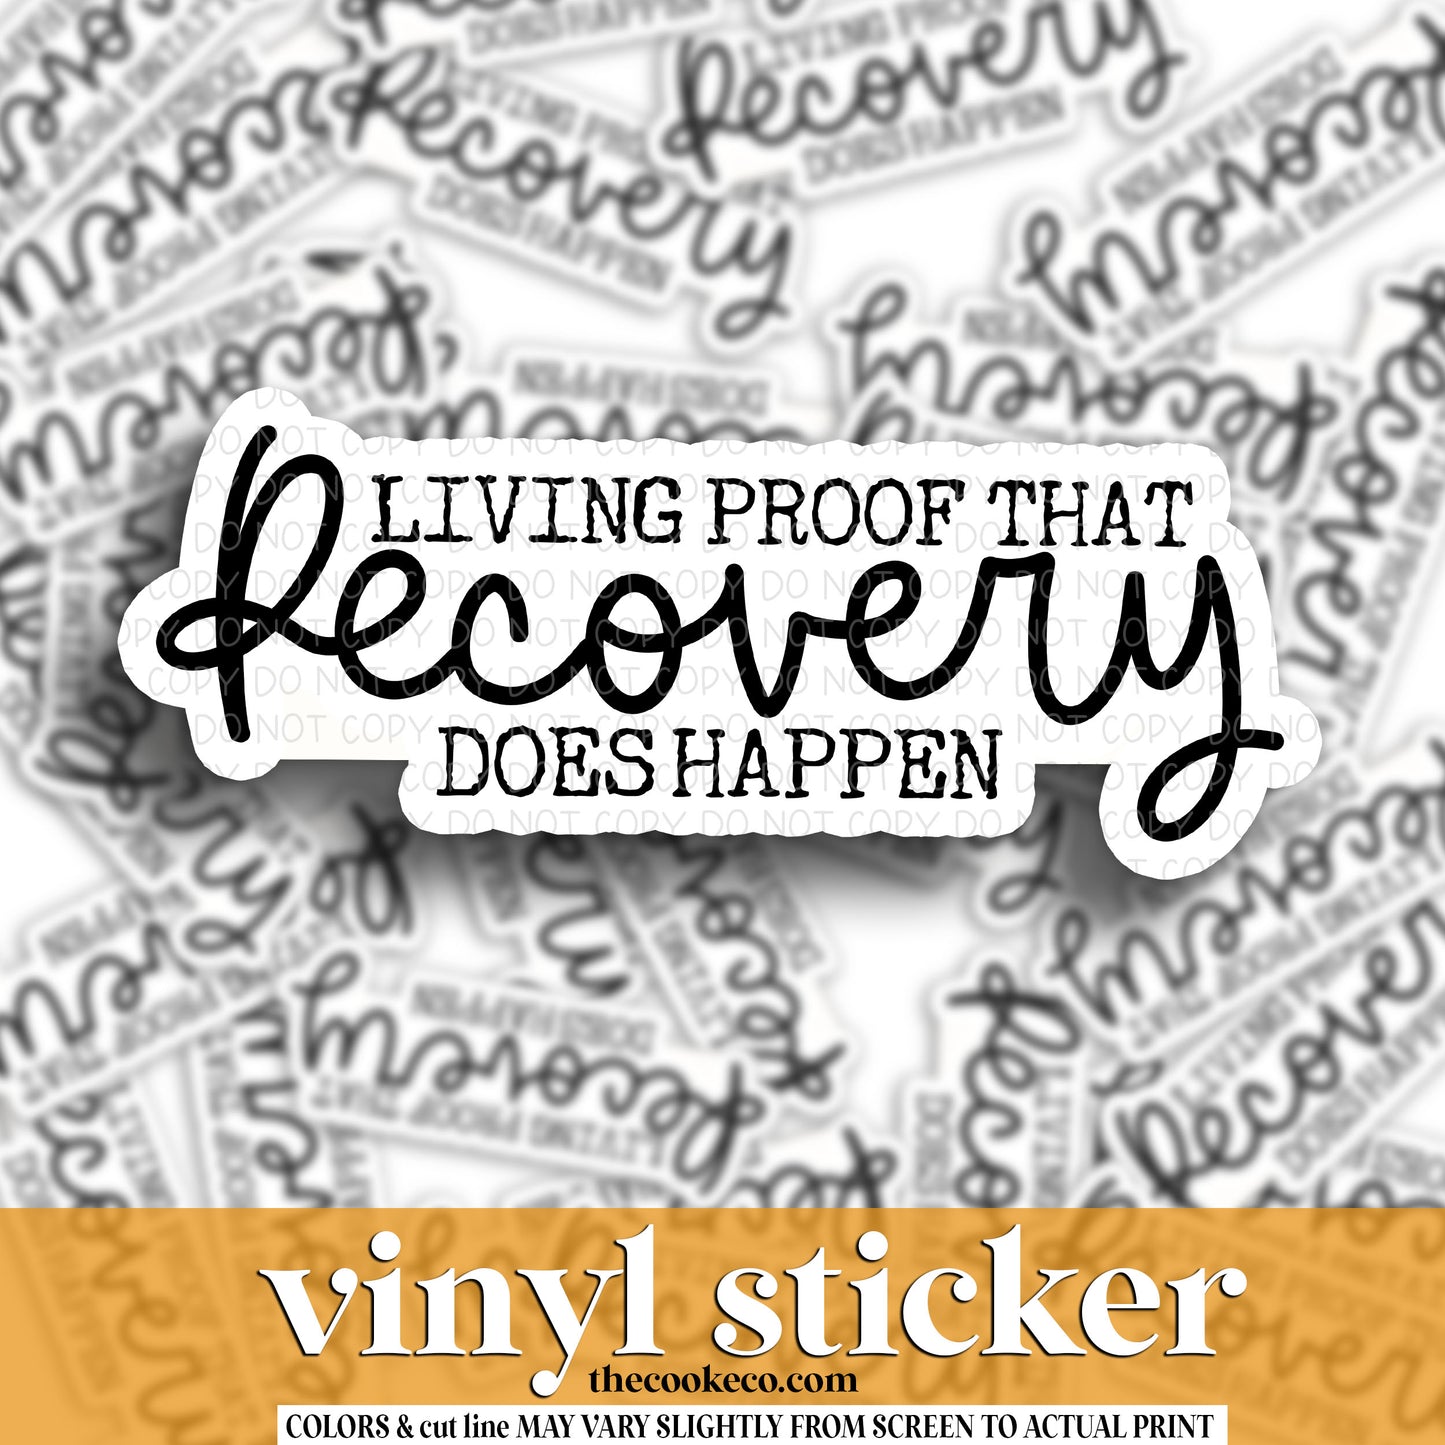 Vinyl Sticker | #V1371 - LIVING PROOF THAT RECOVERY DOES HAPPEN